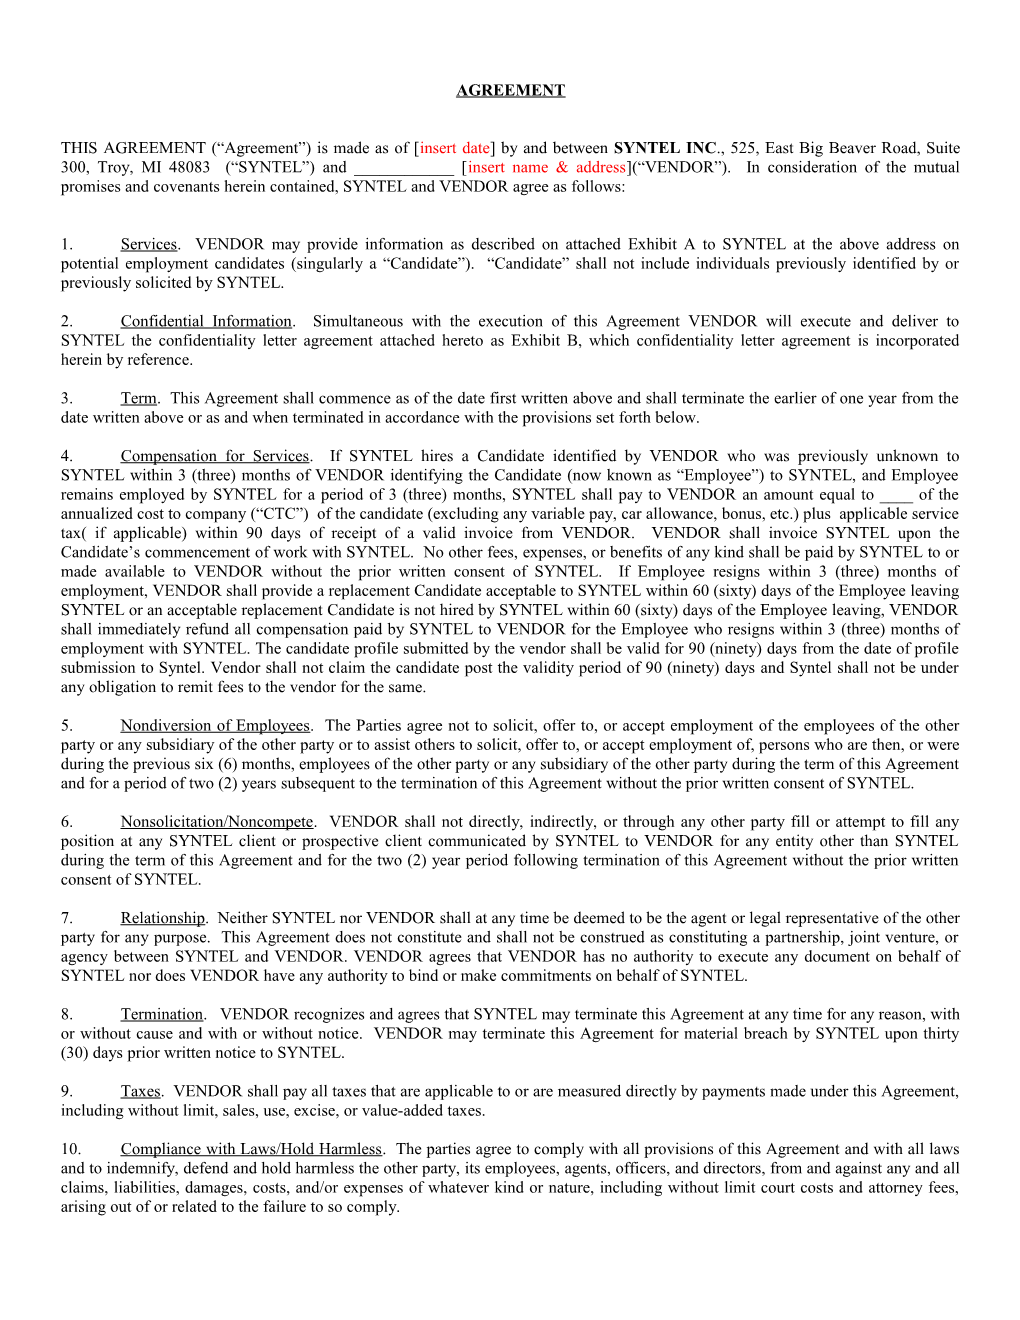 THIS AGREEMENT ( Agreement ) Is Made As of Insert Date by and Between SYNTEL INC., 525